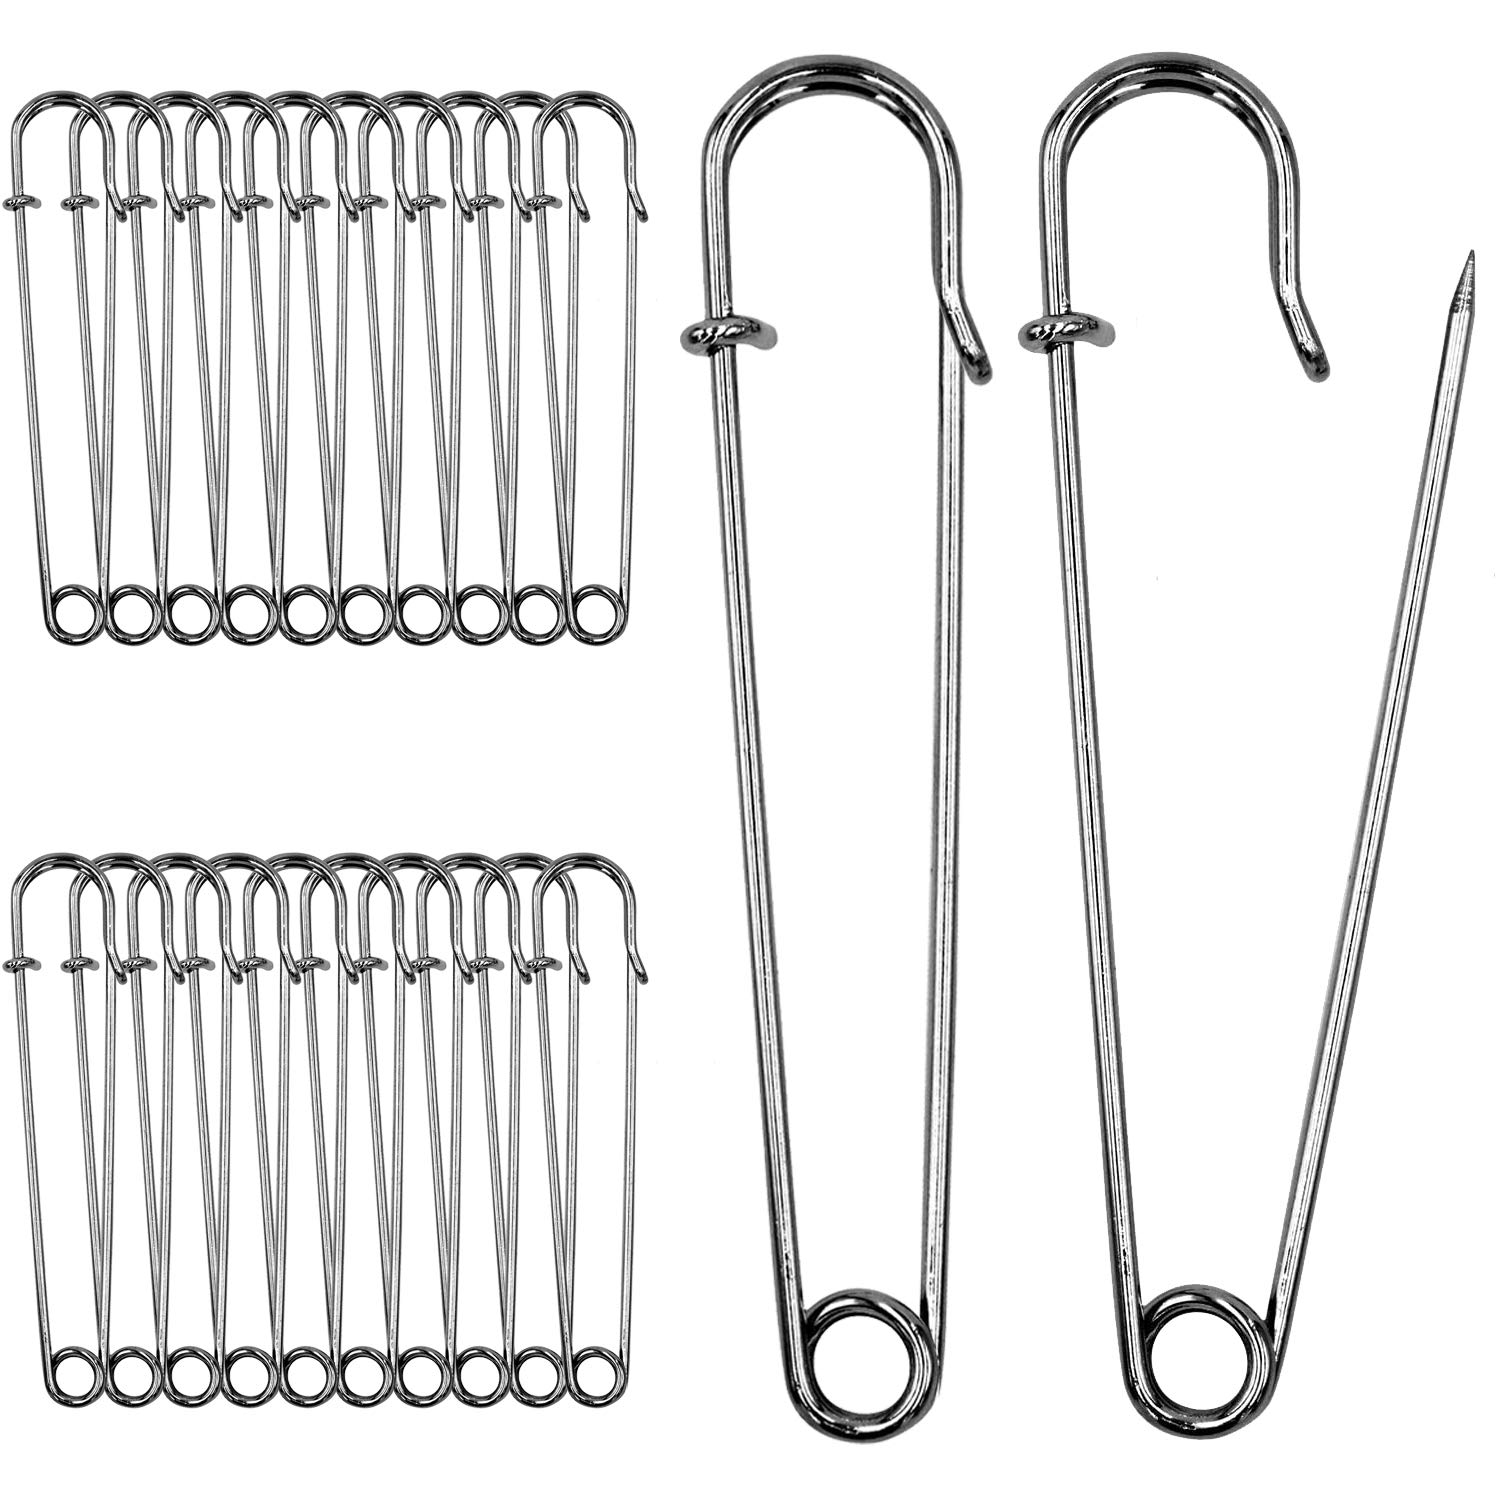 BEADNOVA 4 Inch Large Safety Pins for Clothes Big Heavy Giant Safety Pin  for Fashion Sewing Quilting Blankets Upholstery Laundry and Craft (10cm  20pcs)